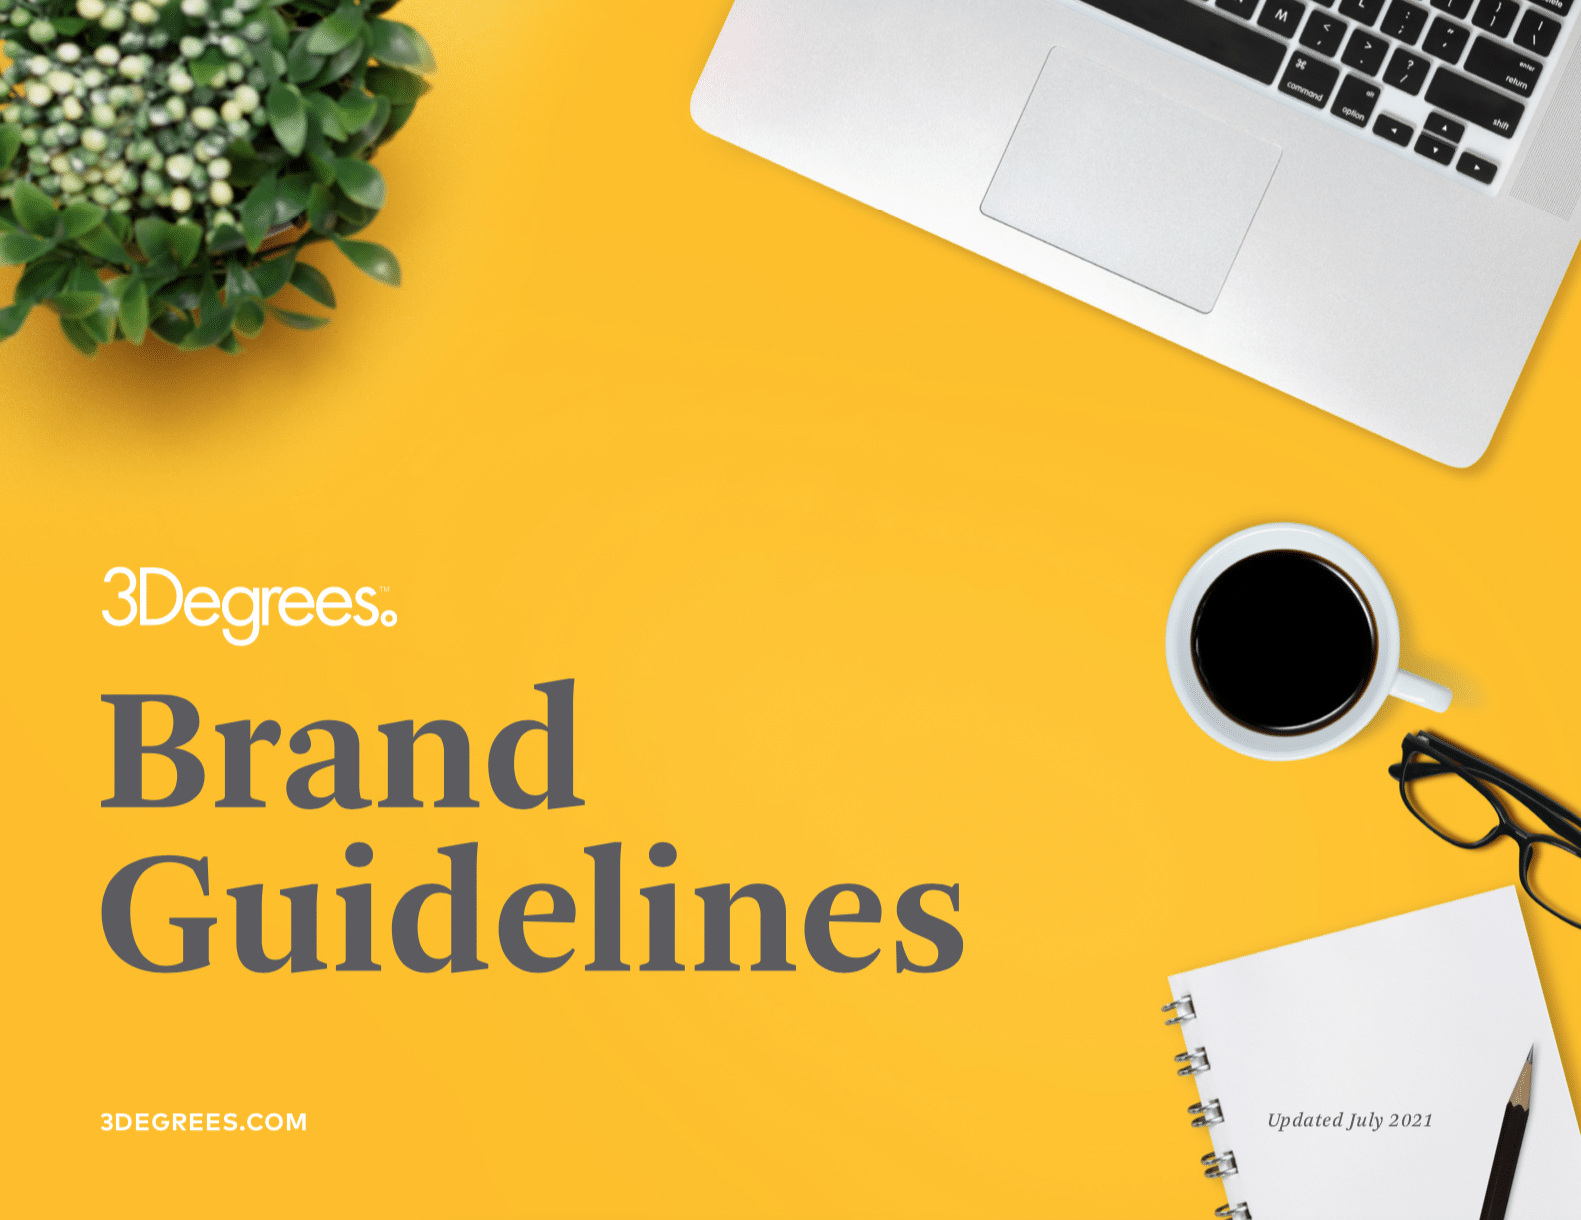 Brand Guidelines cover